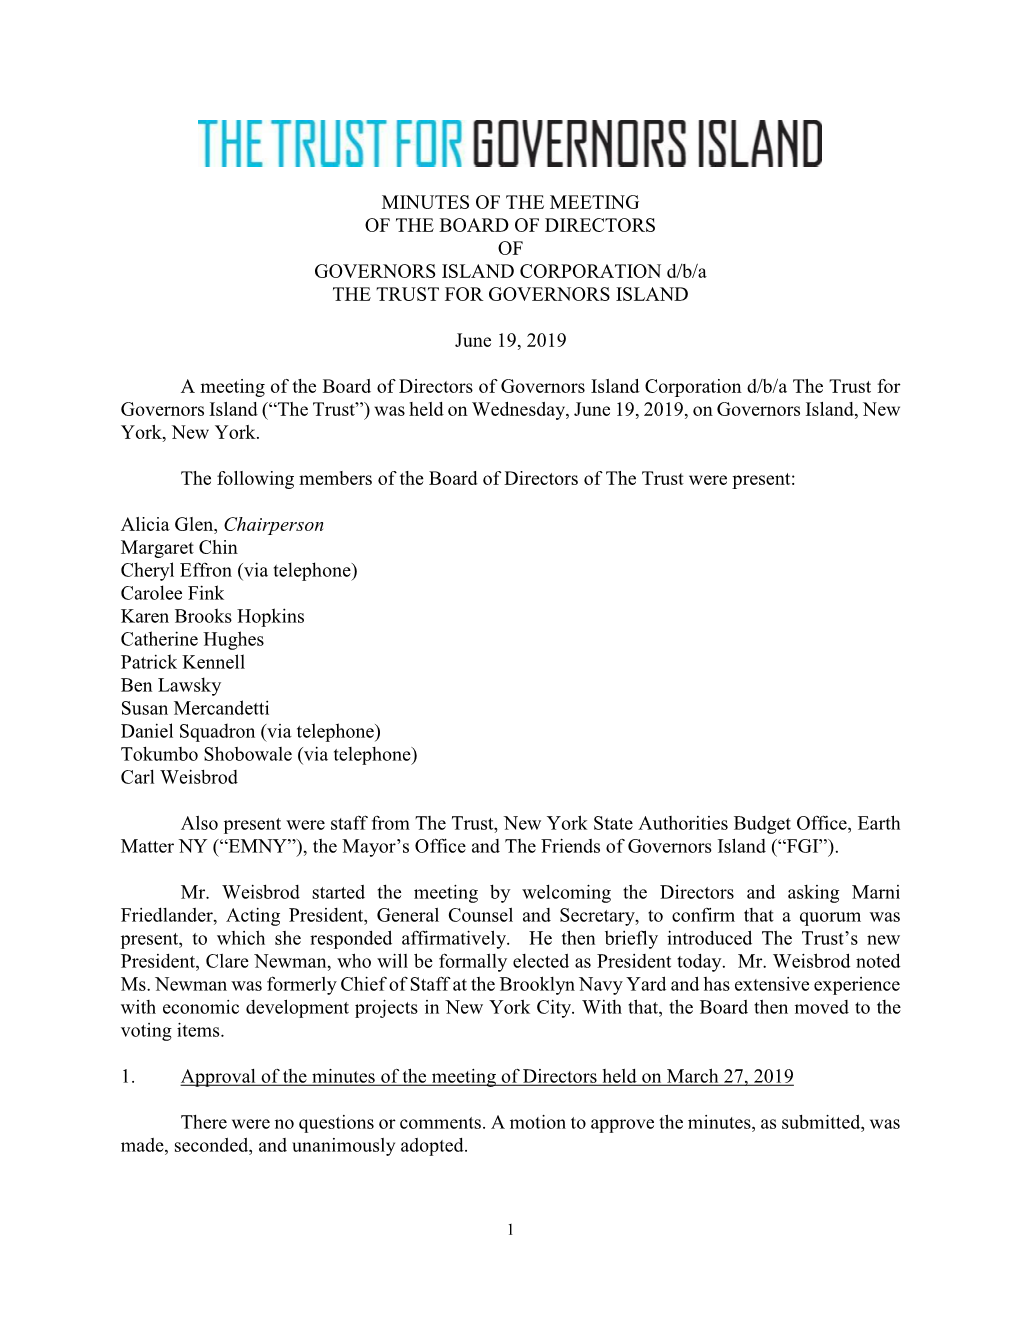 MINUTES of the MEETING of the BOARD of DIRECTORS of GOVERNORS ISLAND CORPORATION D/B/A the TRUST for GOVERNORS ISLAND